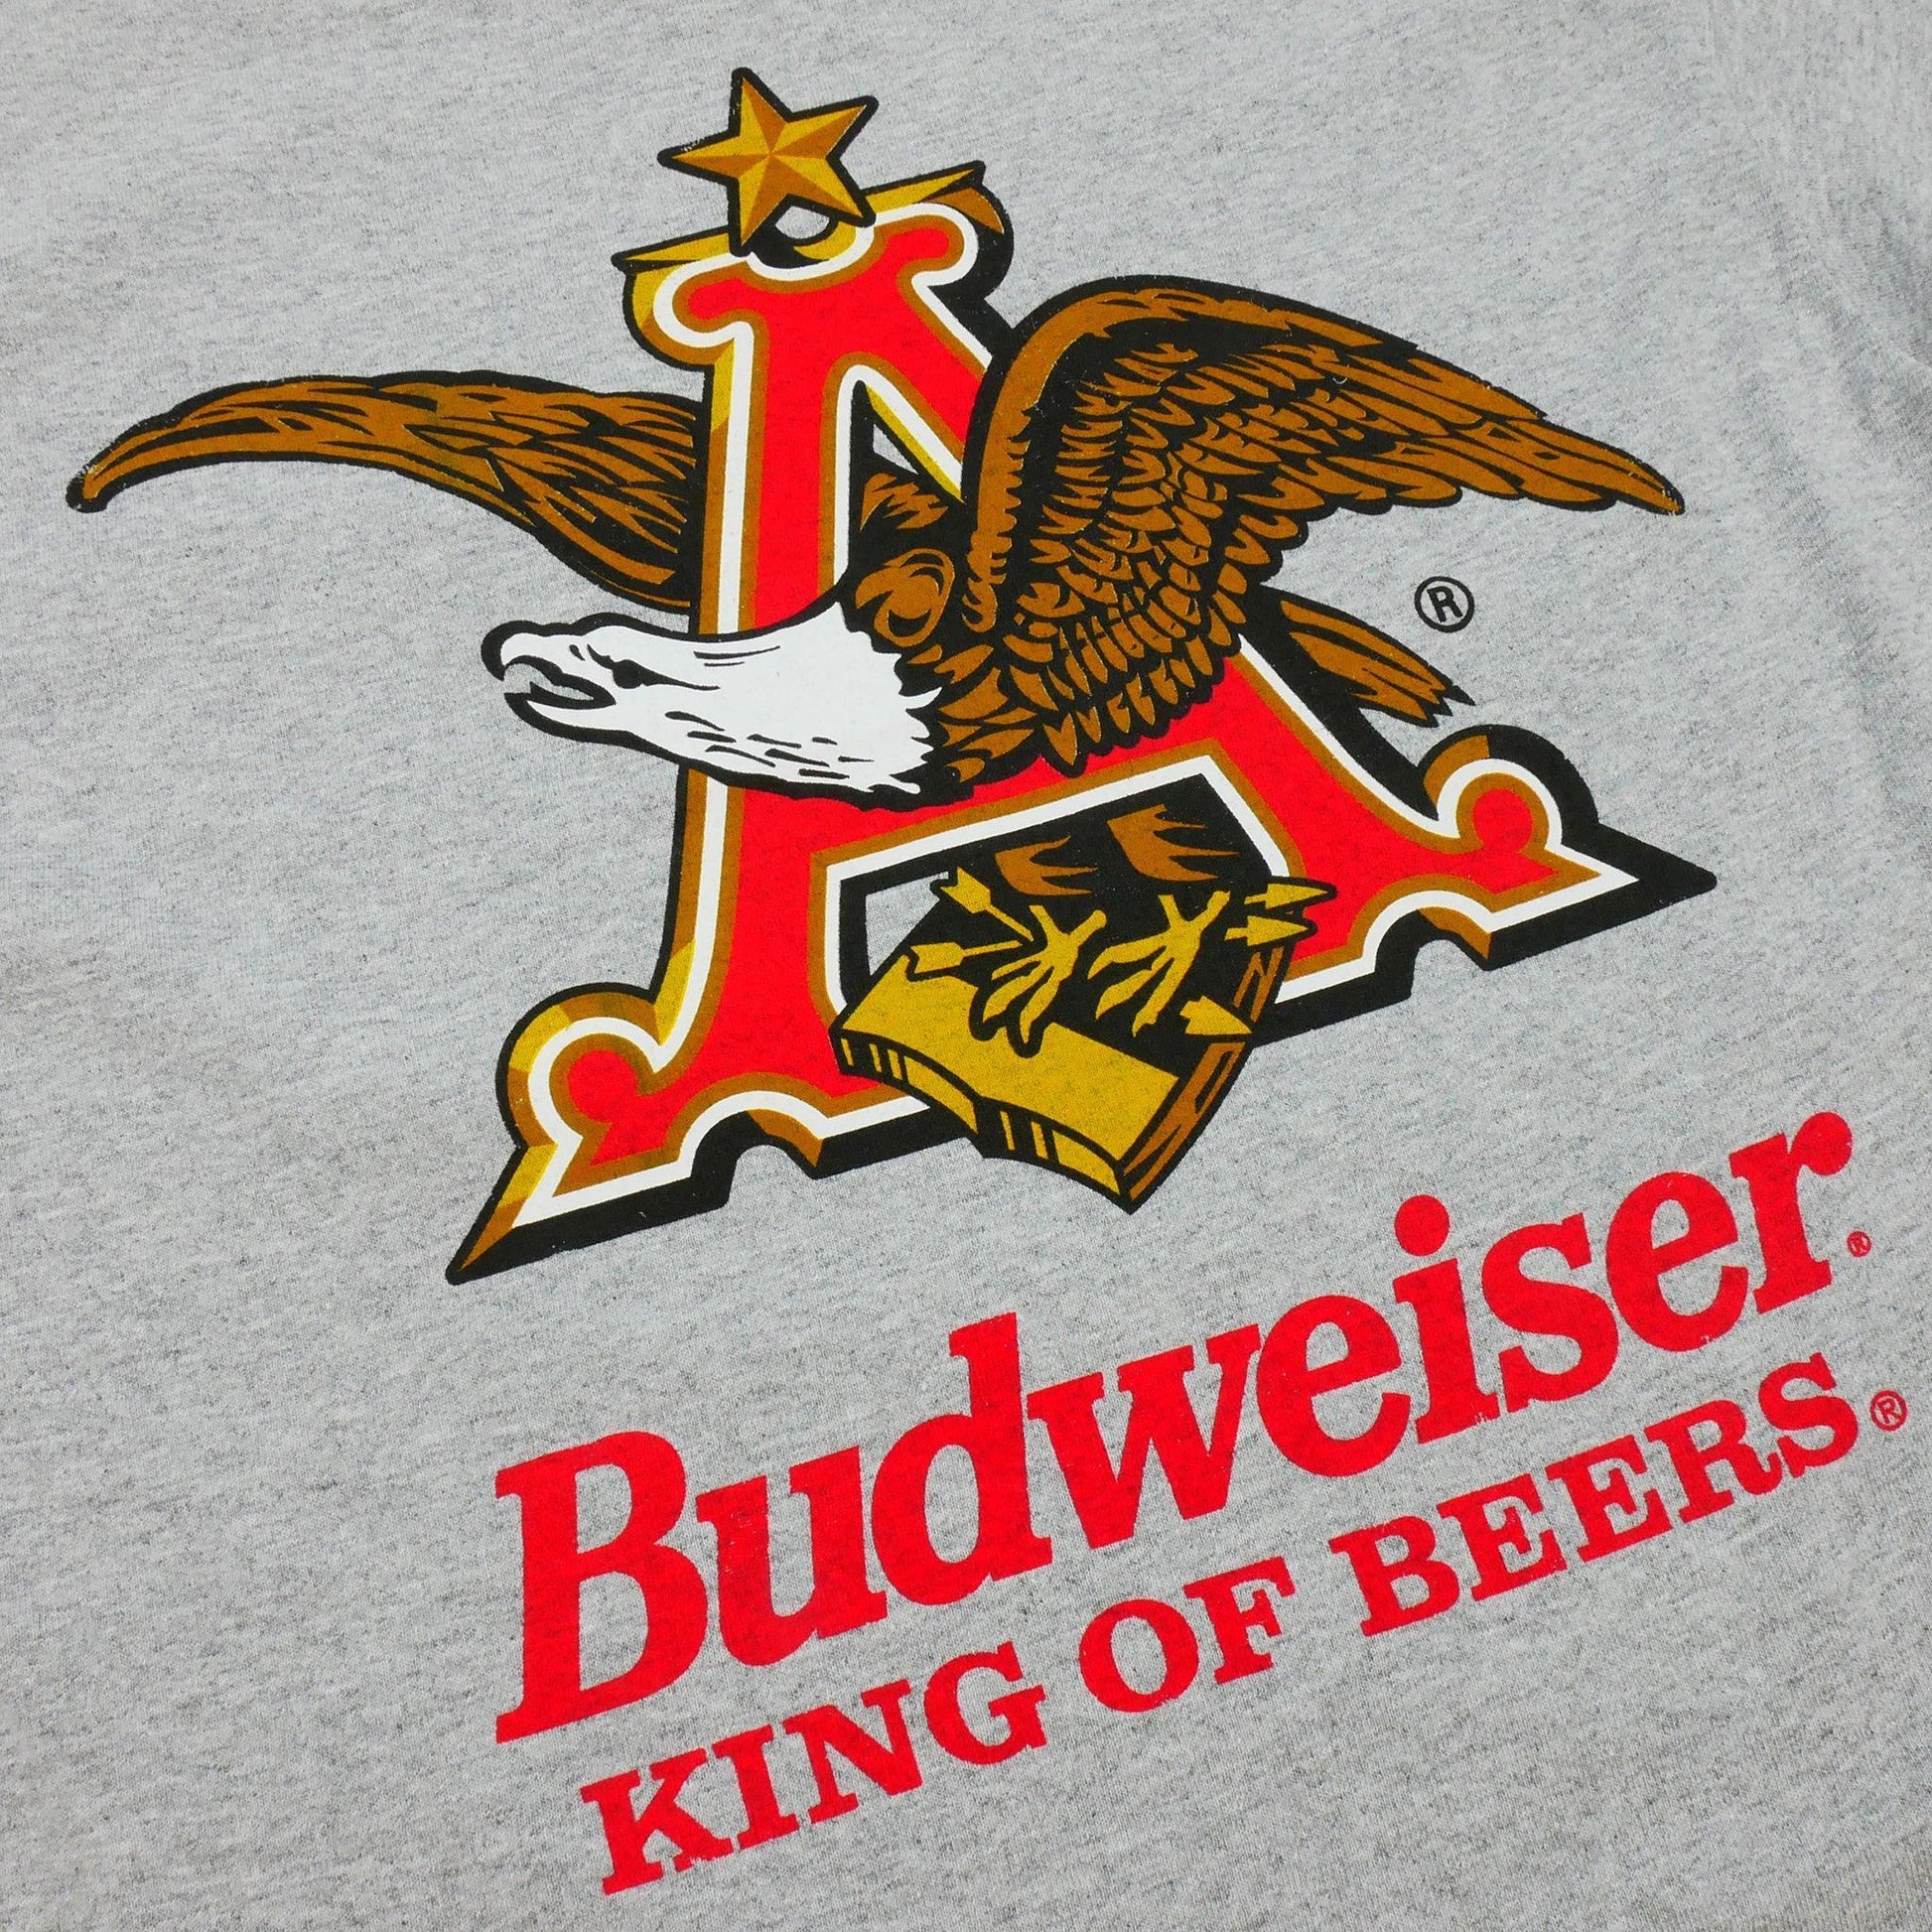 detail of a&e logo with budweiser king of beerks below 